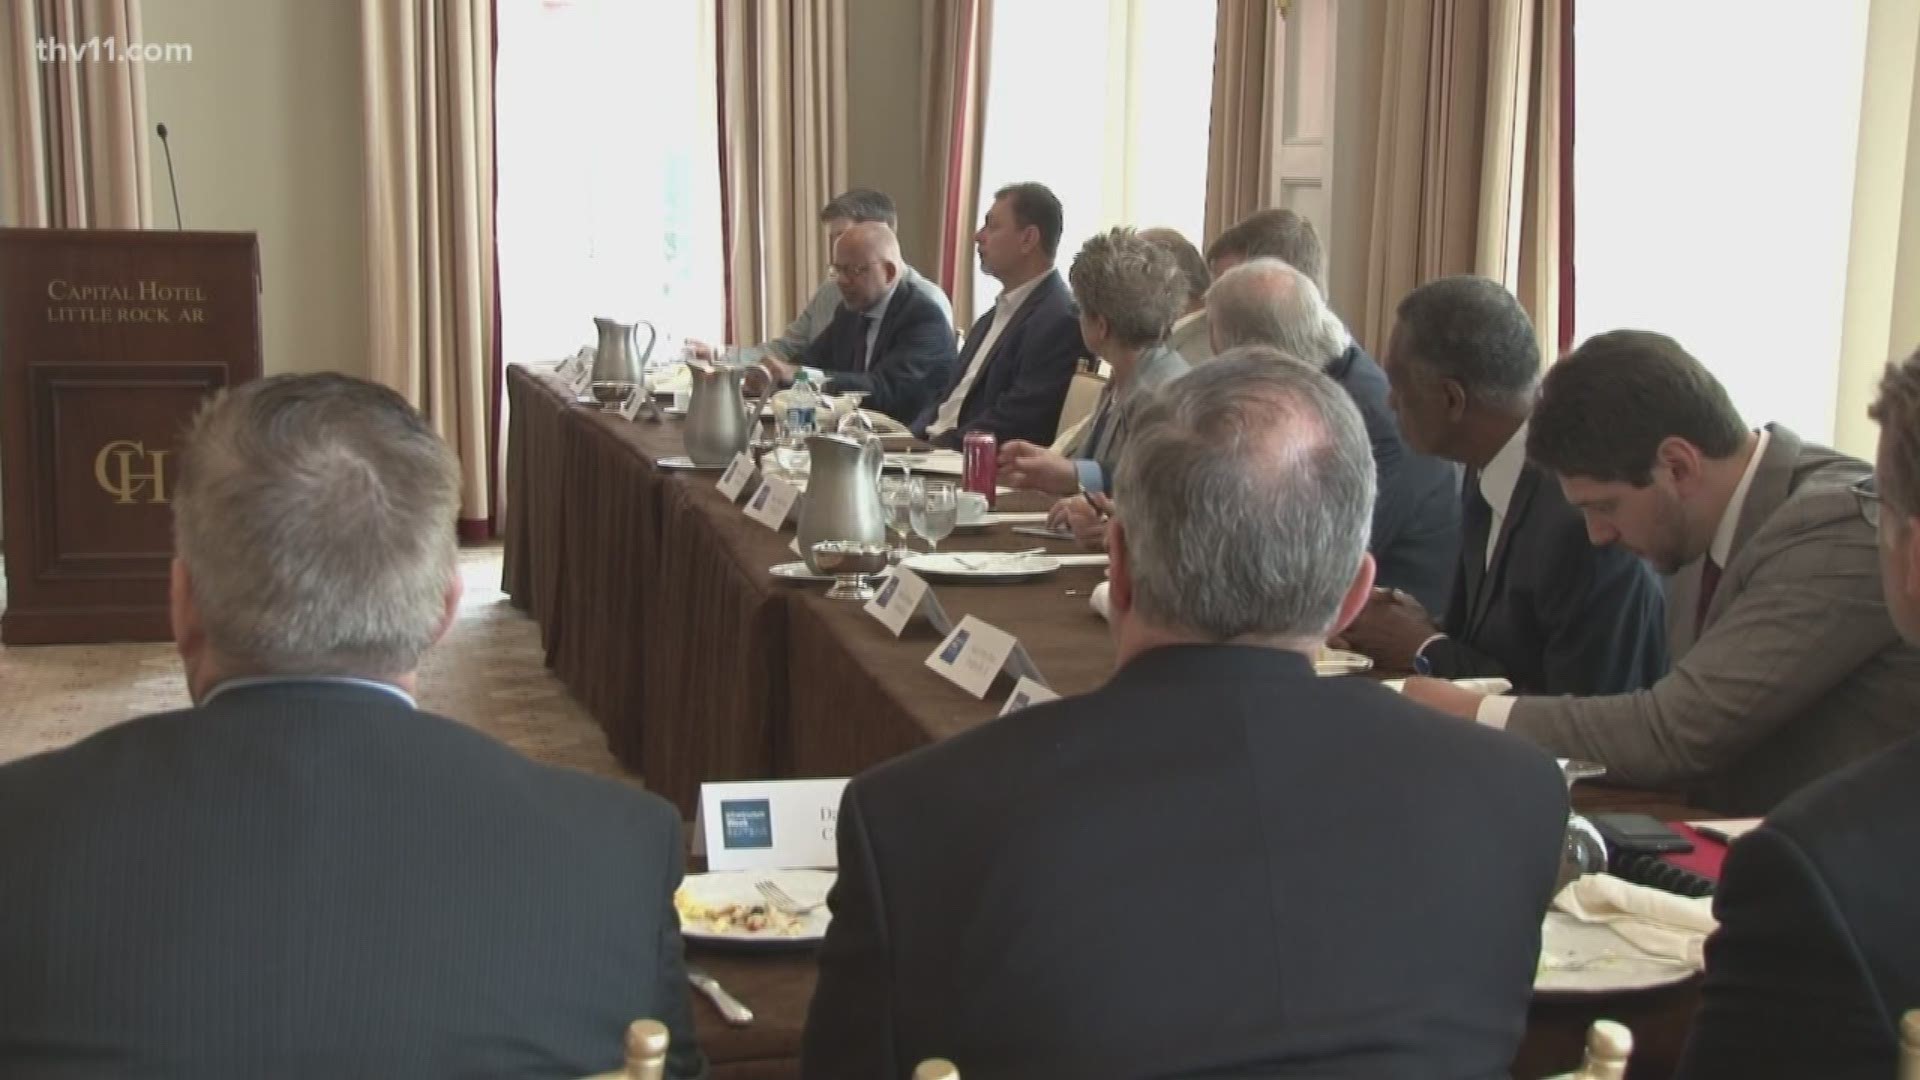 In Little Rock, political and business leaders got together this morning.